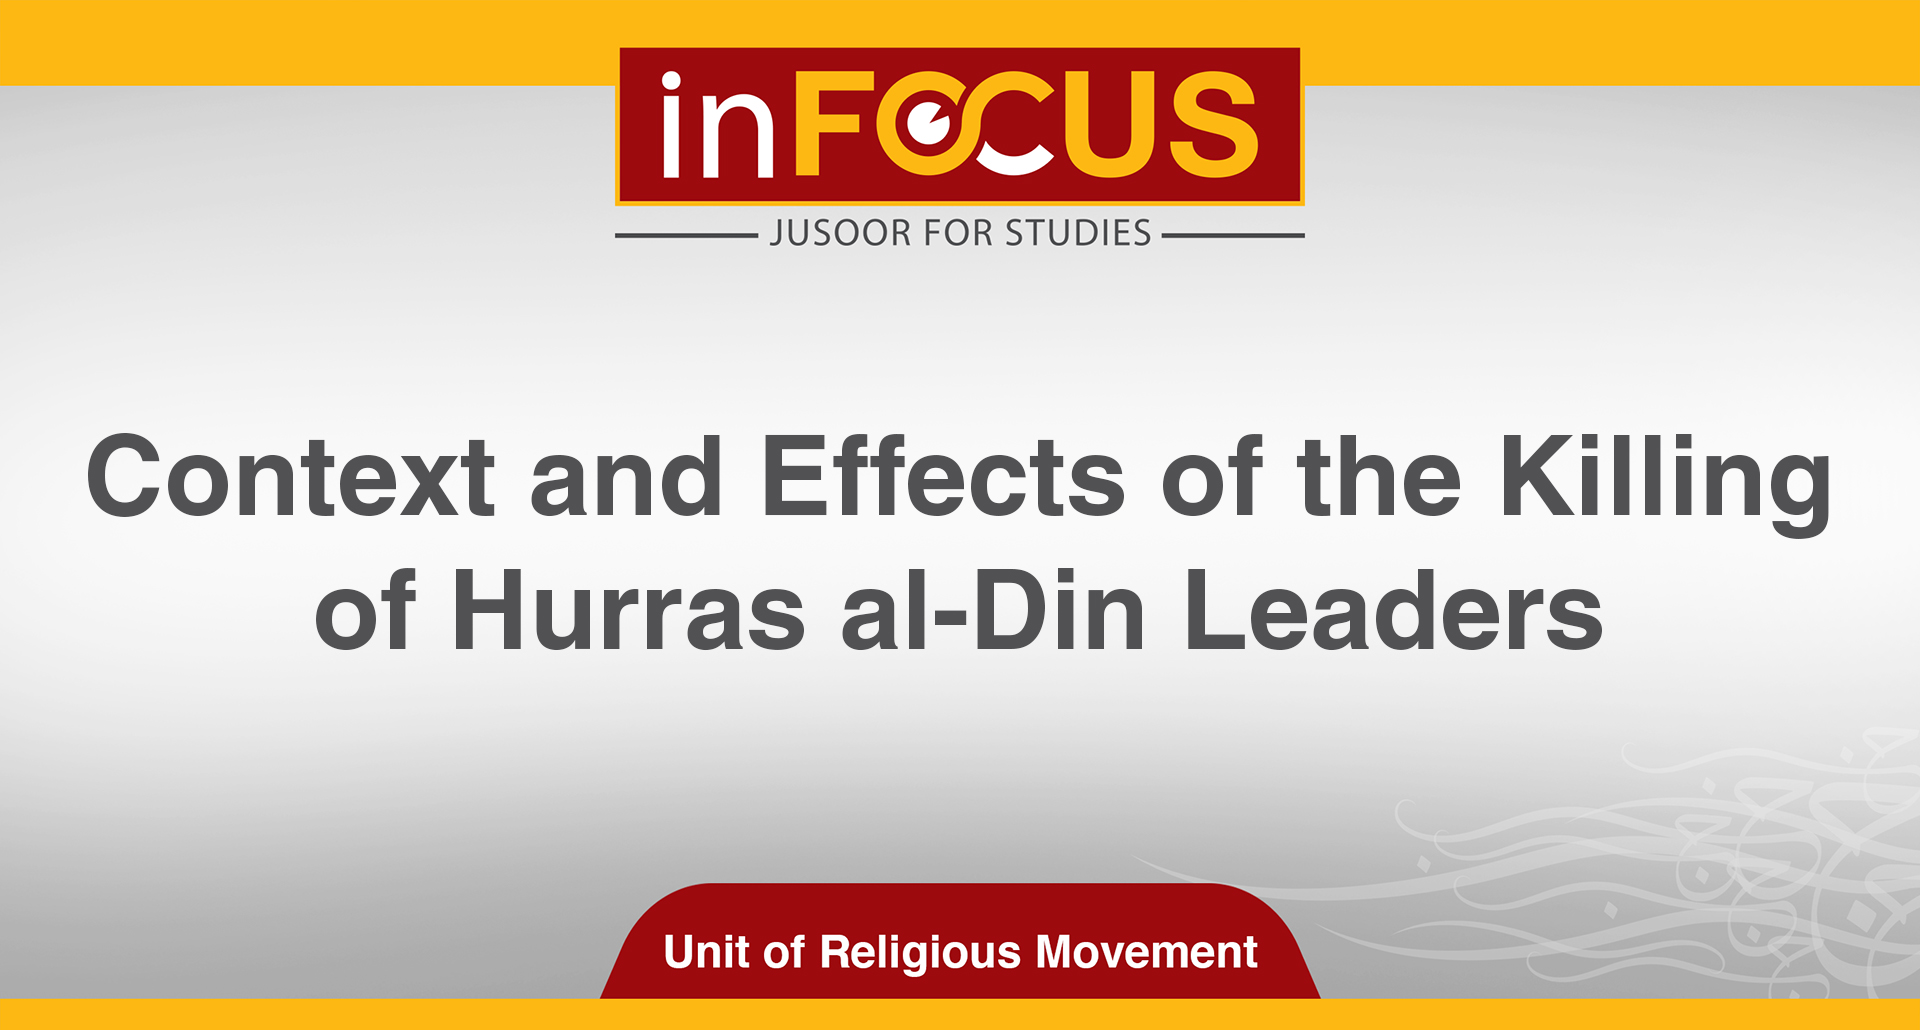 Context and Effects of the Killing of Hurras al-Din Leaders